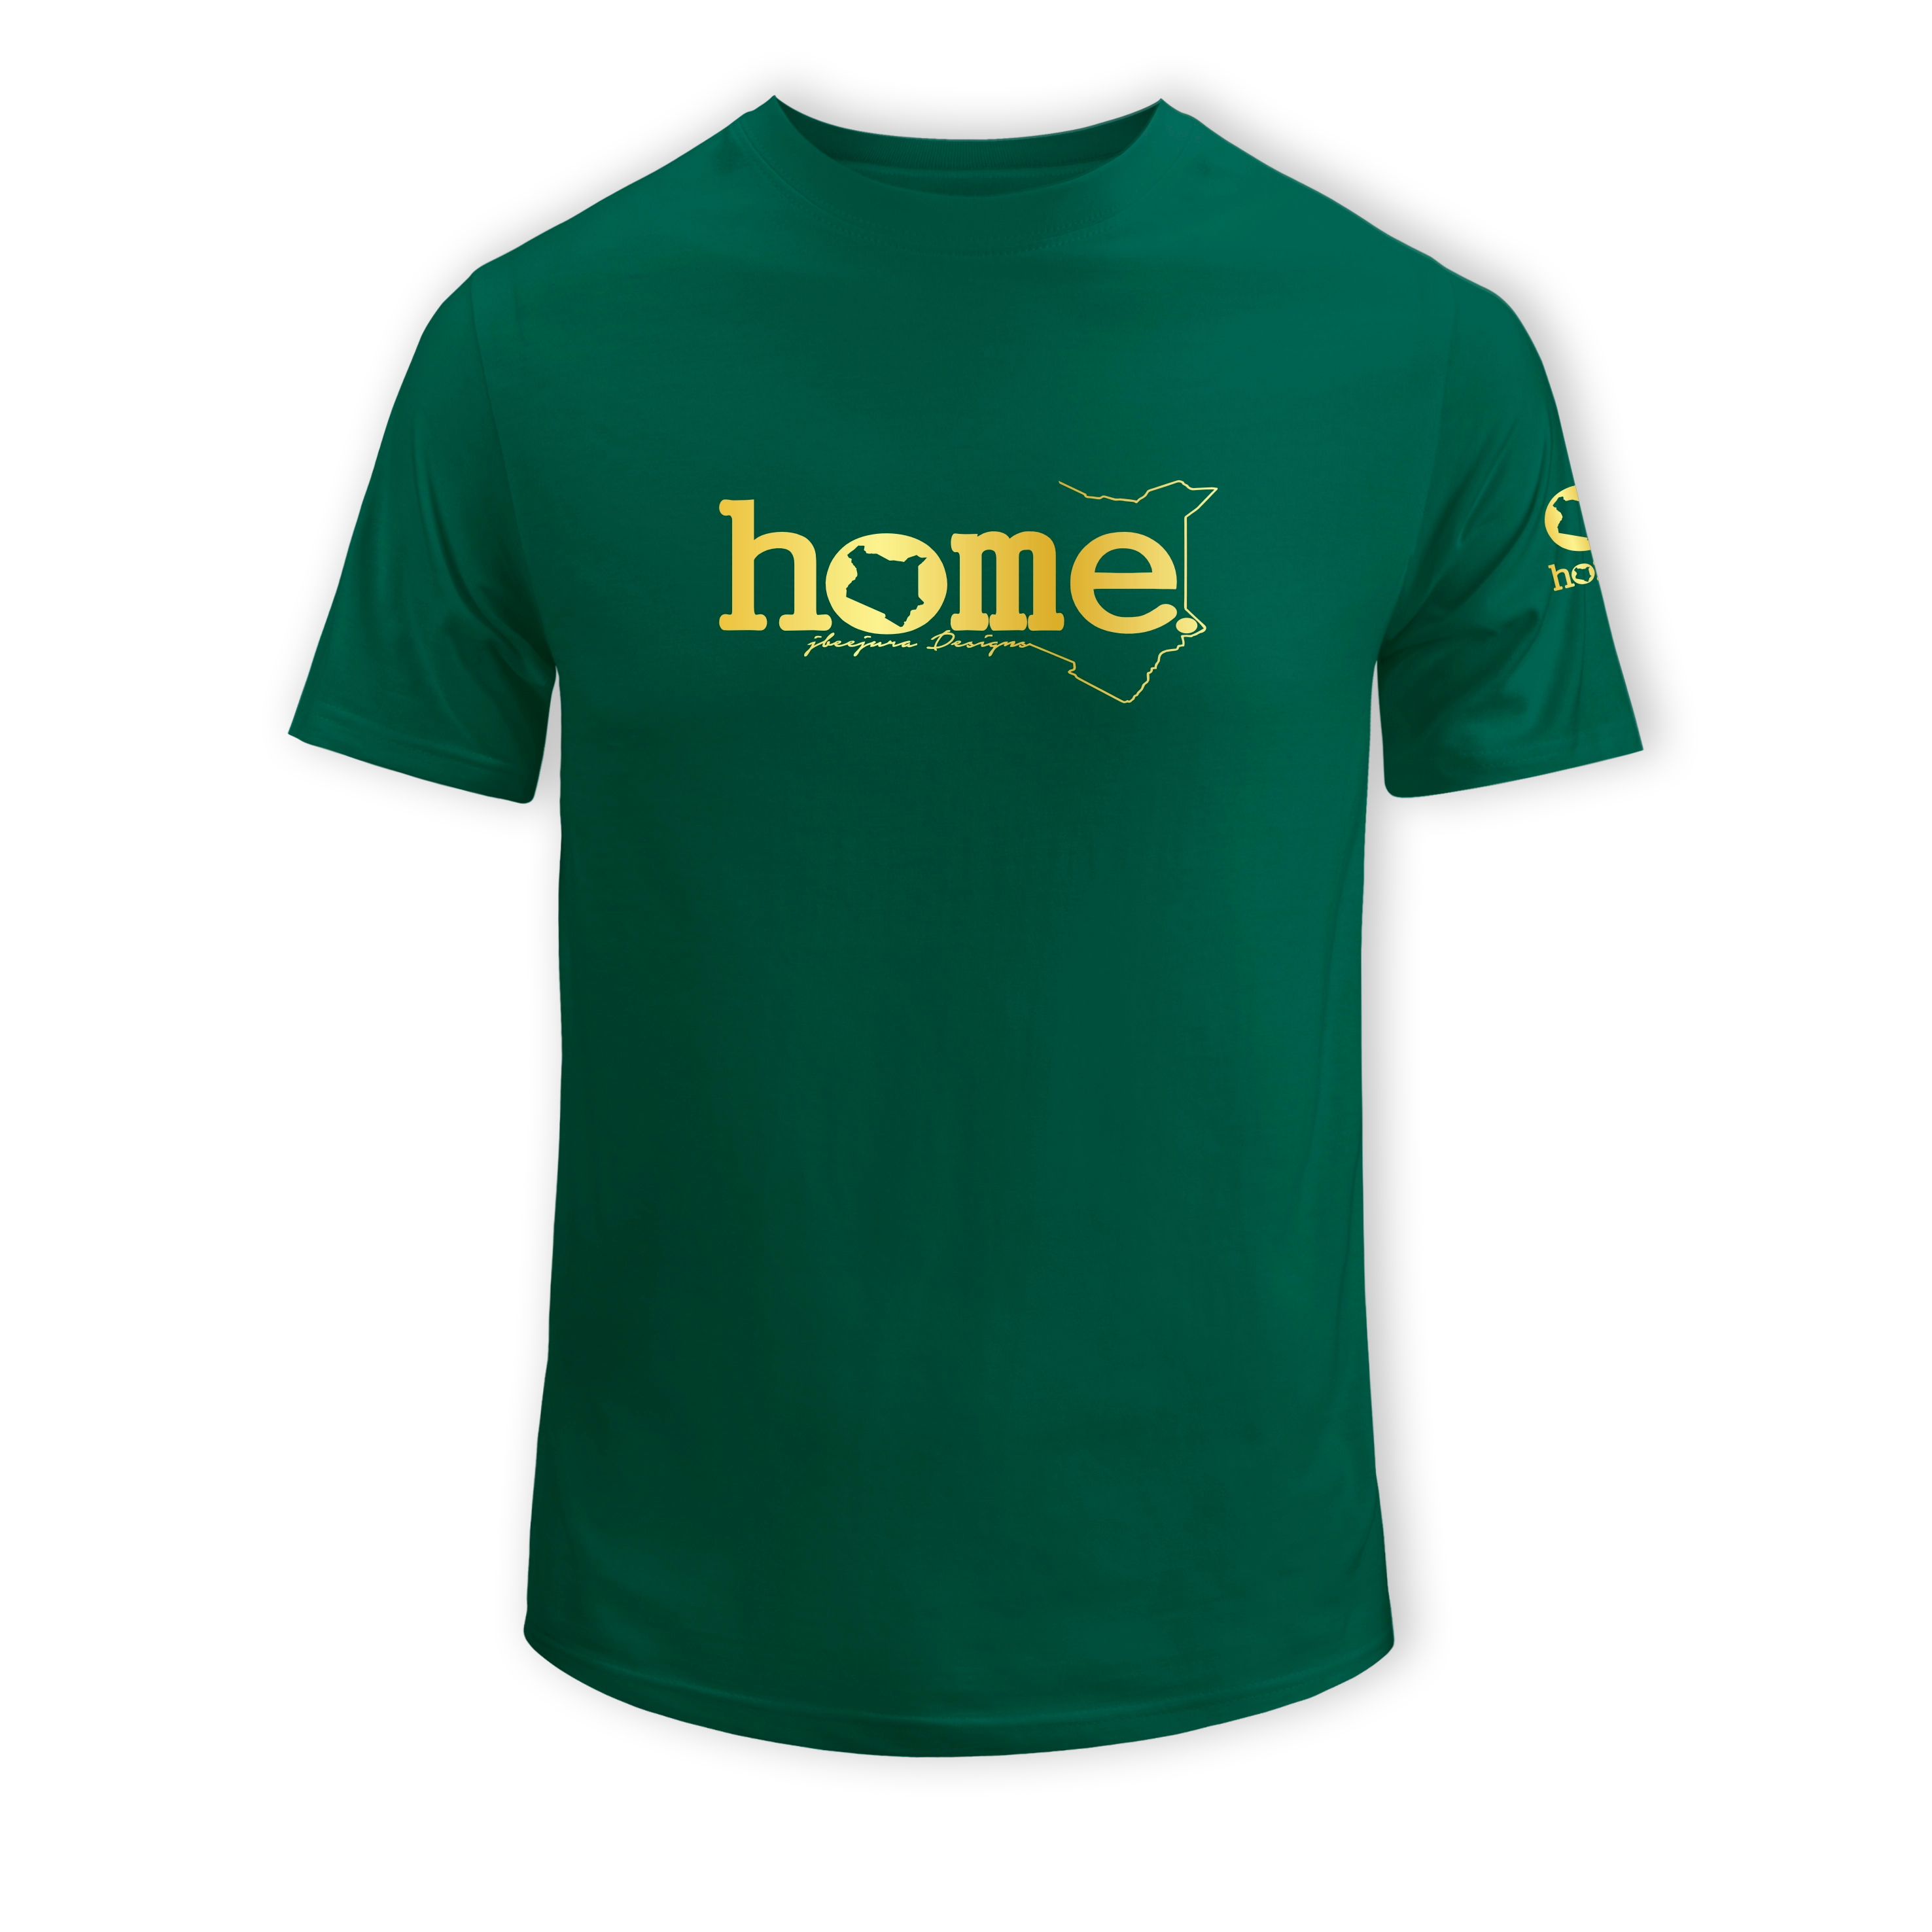 home_254 KIDS SHORT-SLEEVED RICH GREEN T-SHIRT WITH A GOLD CLASSIC WORDS PRINT – COTTON PLUS FABRIC